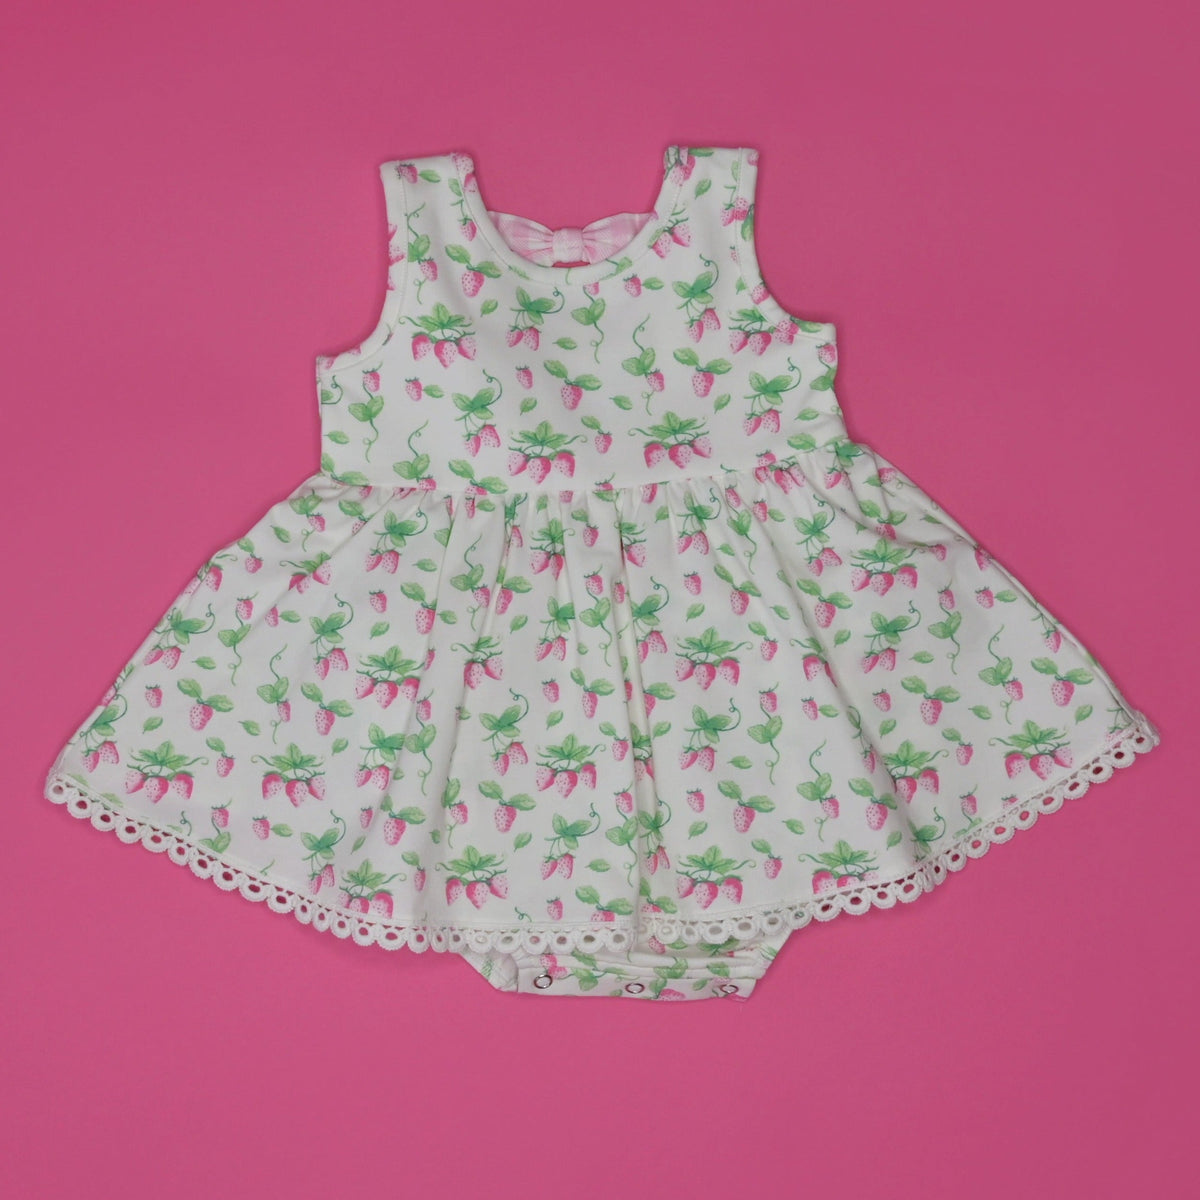 Serendipity Clothing Co. Spring Berries Bow Bubble Dress